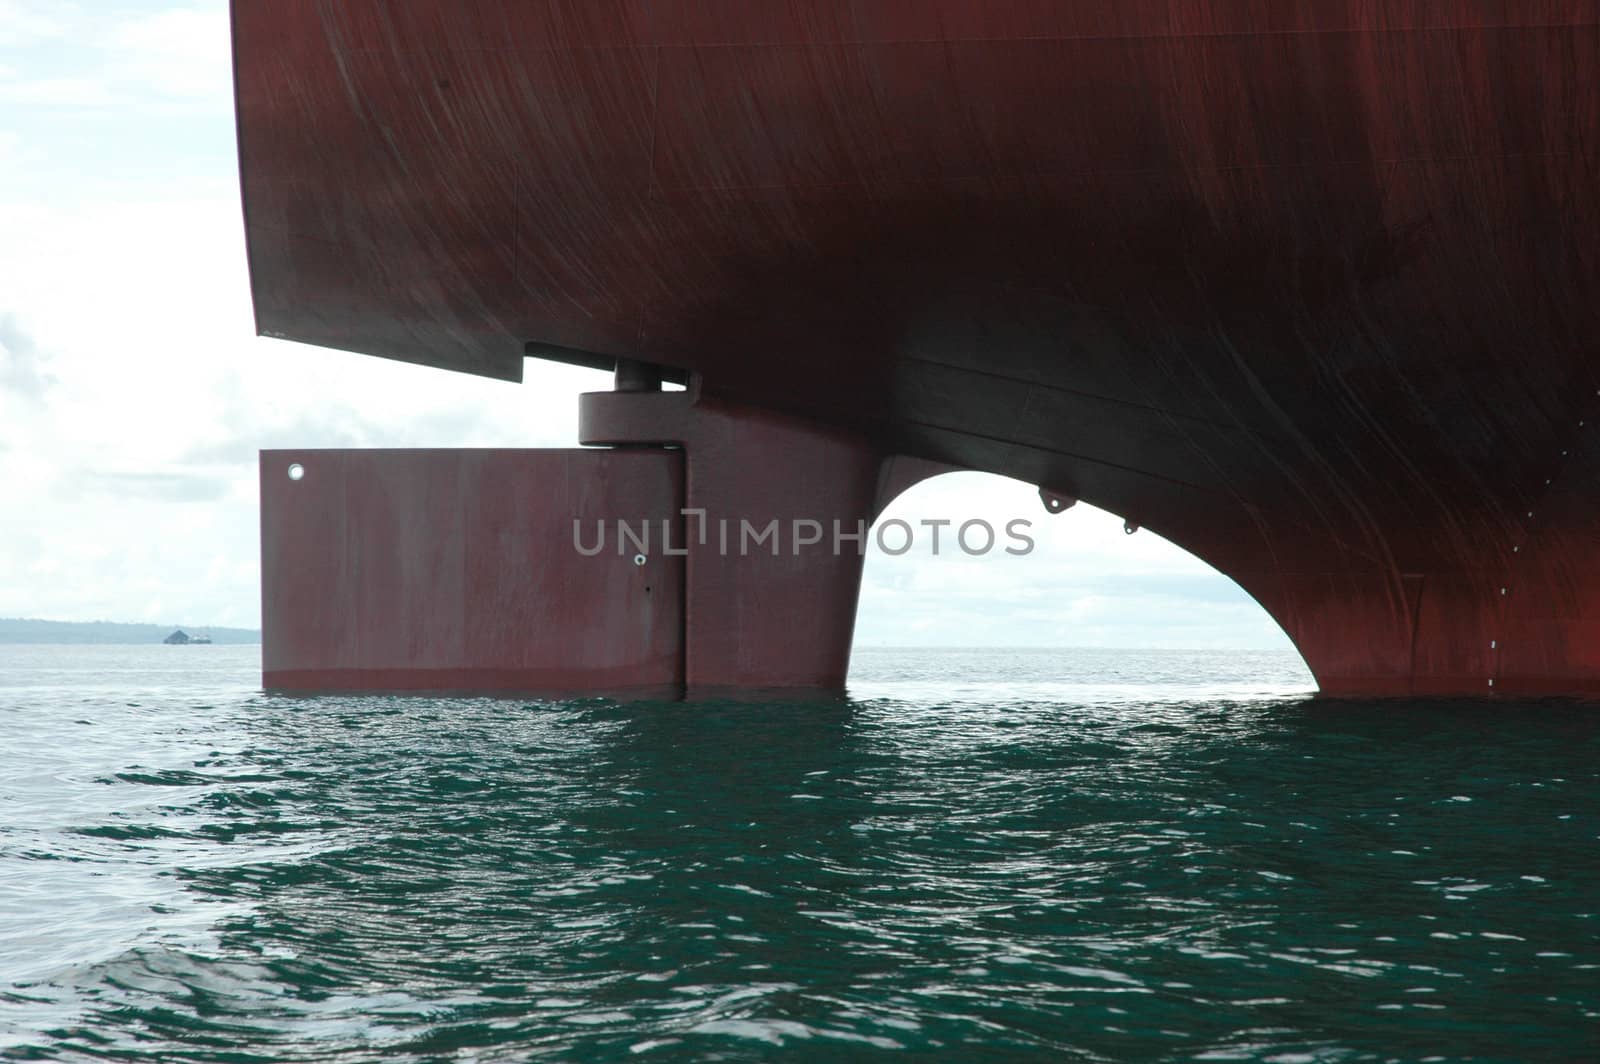 the rear wheel of a large tanker